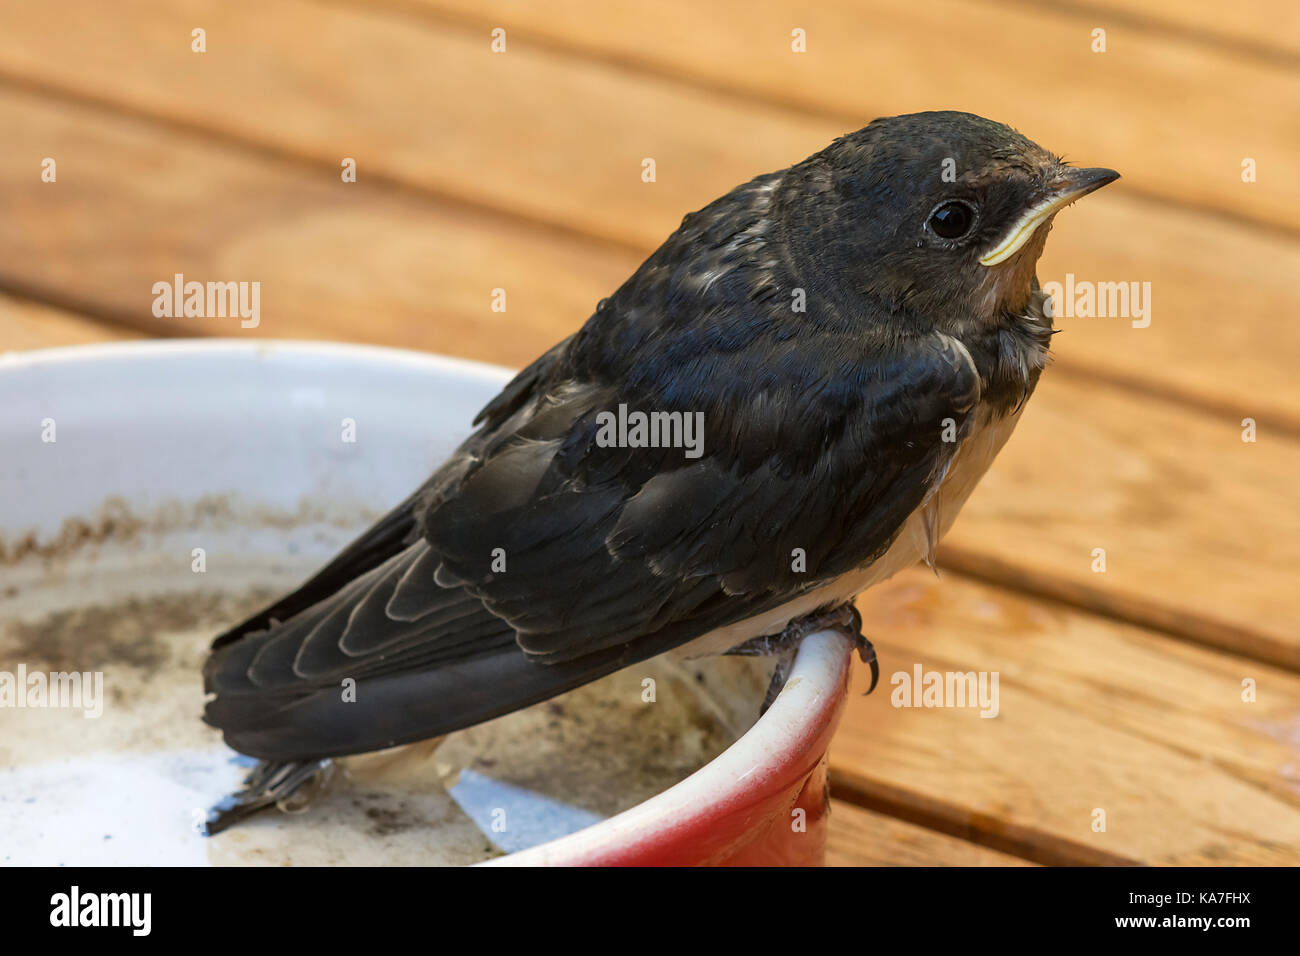 Young Common house martin (Delichon urbicum) sitting on edge of a bowl, Baden-Württemberg, Germany Stock Photo